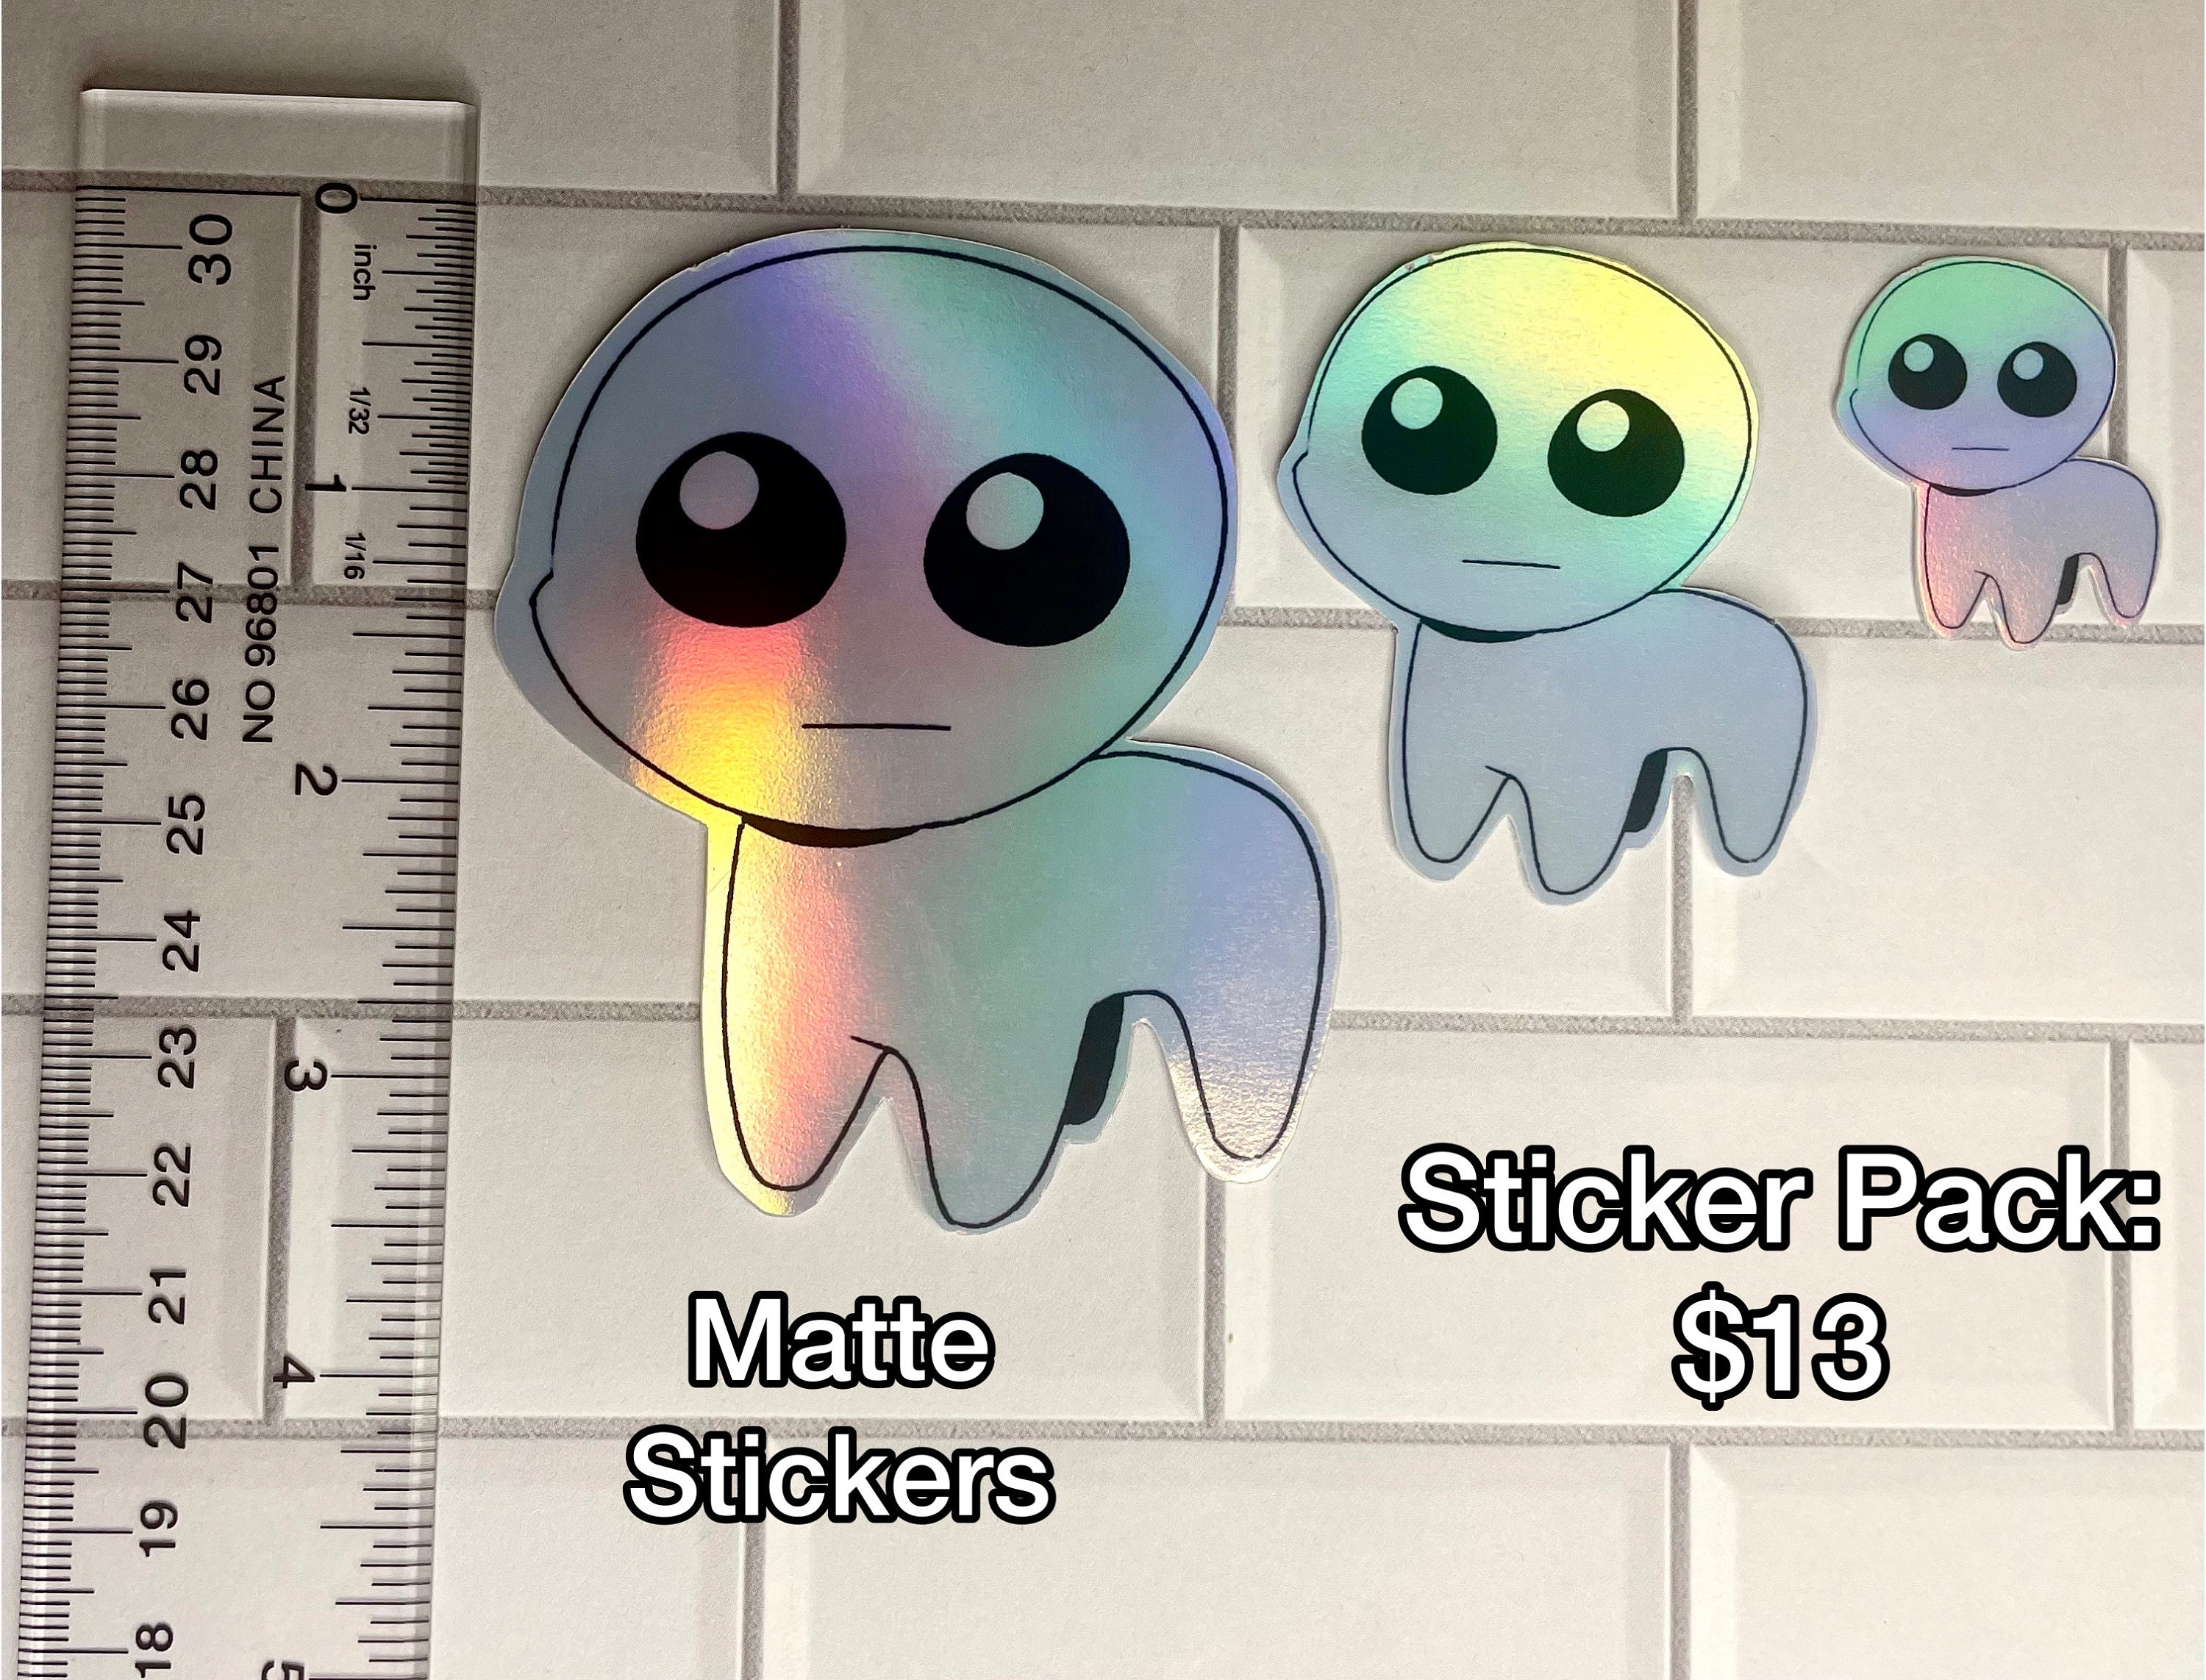 TBH Creature / Autism creature Sticker for Sale by Borg219467